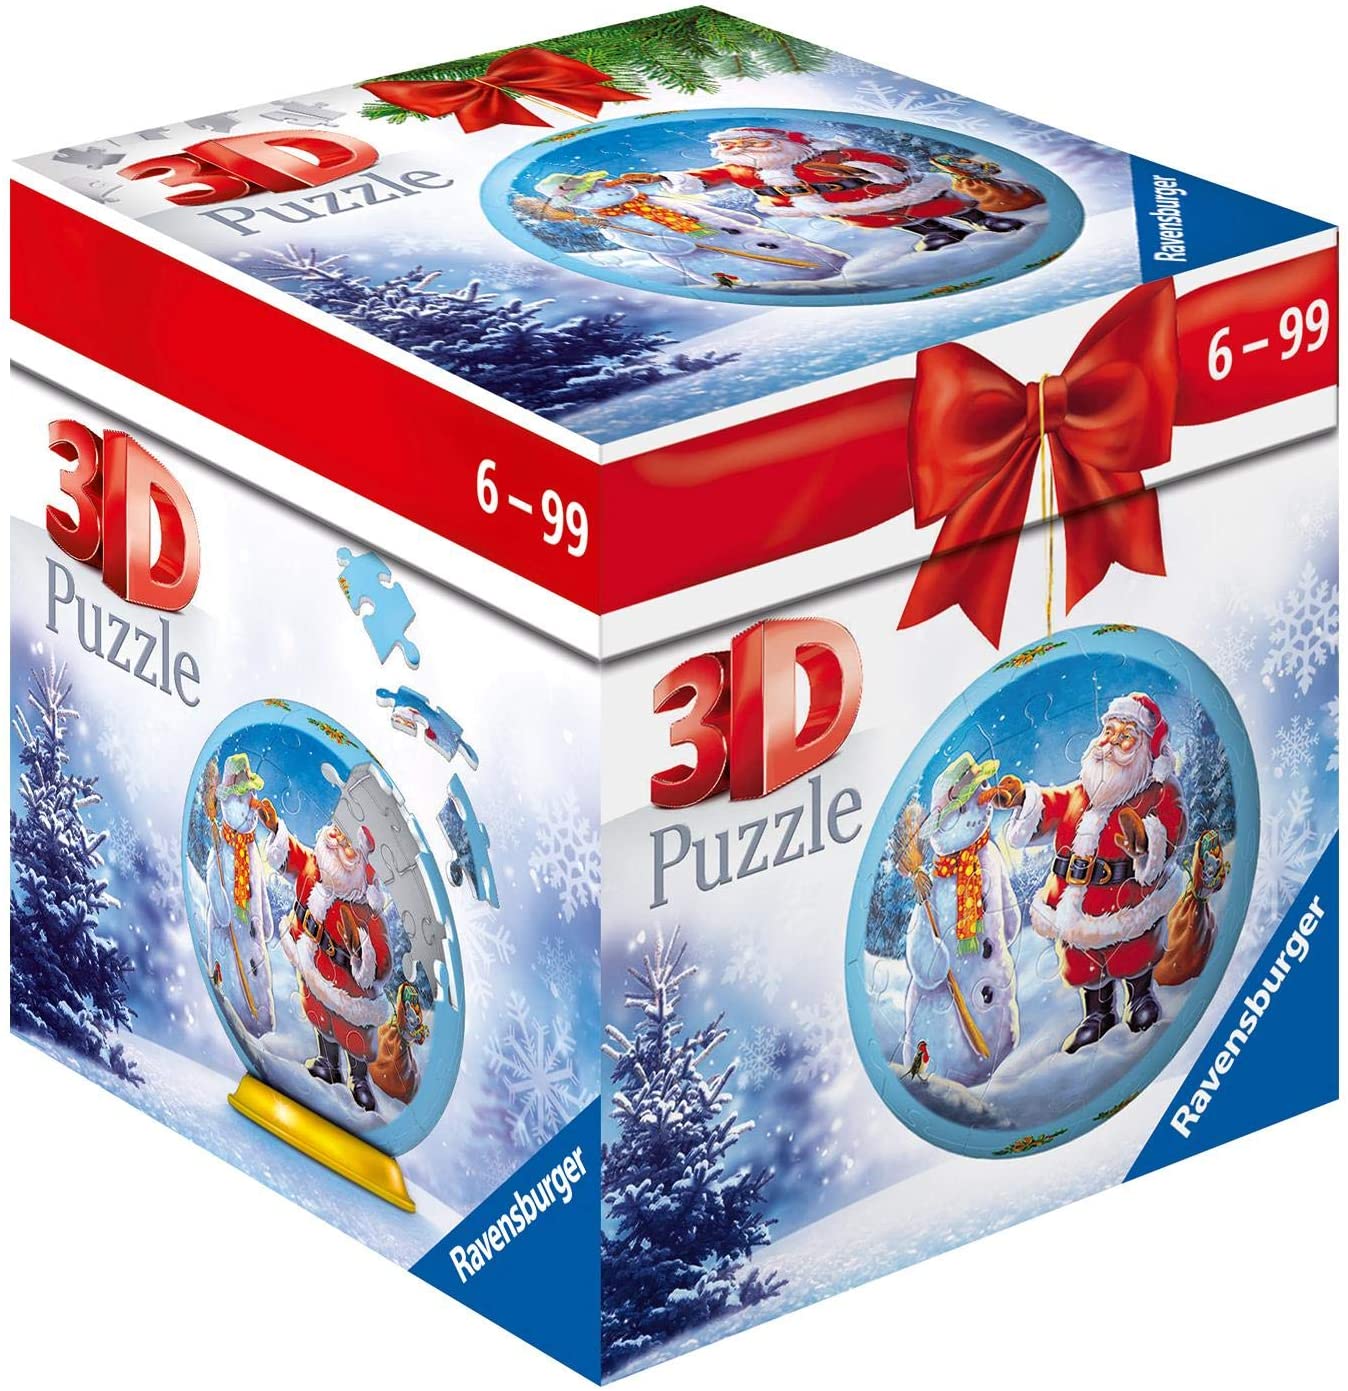 Prestige systematisch echo Christmas Puzzle Ball (54 pc 3D Puzzle)